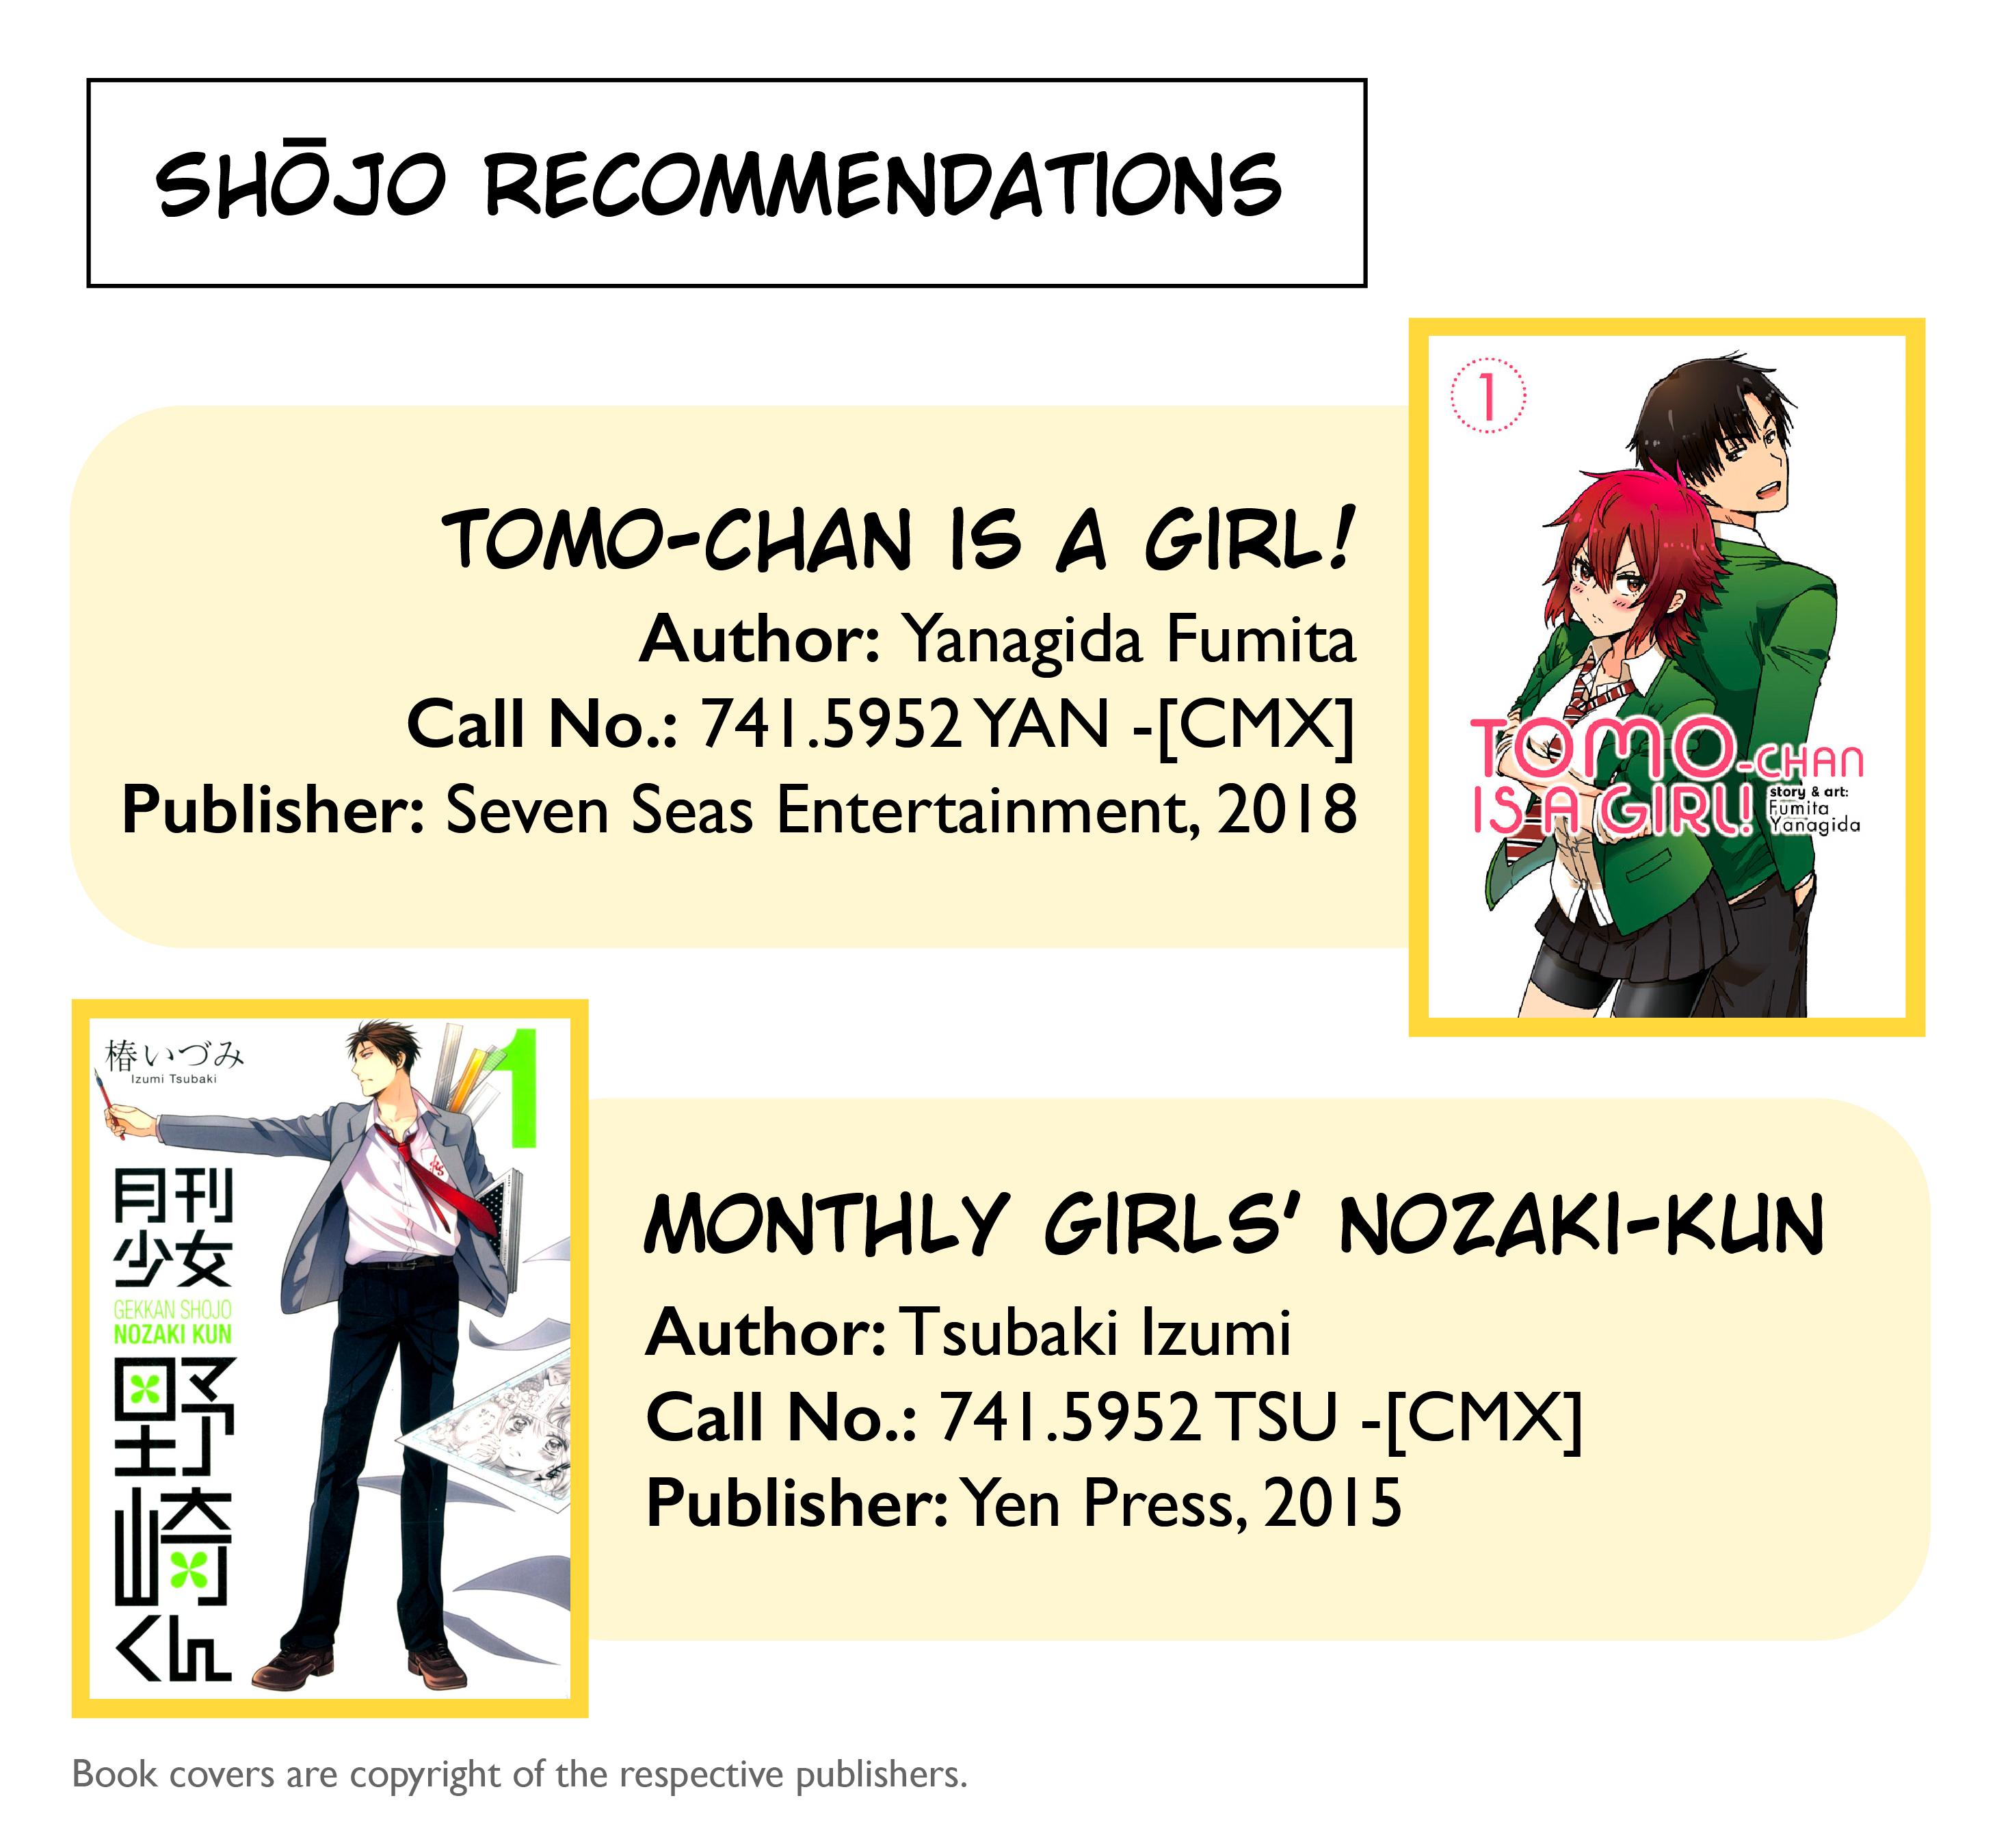 Shojo recommendations include Tomo-chan is a Girl! and Monthly Girls’ Nozaki-kun.